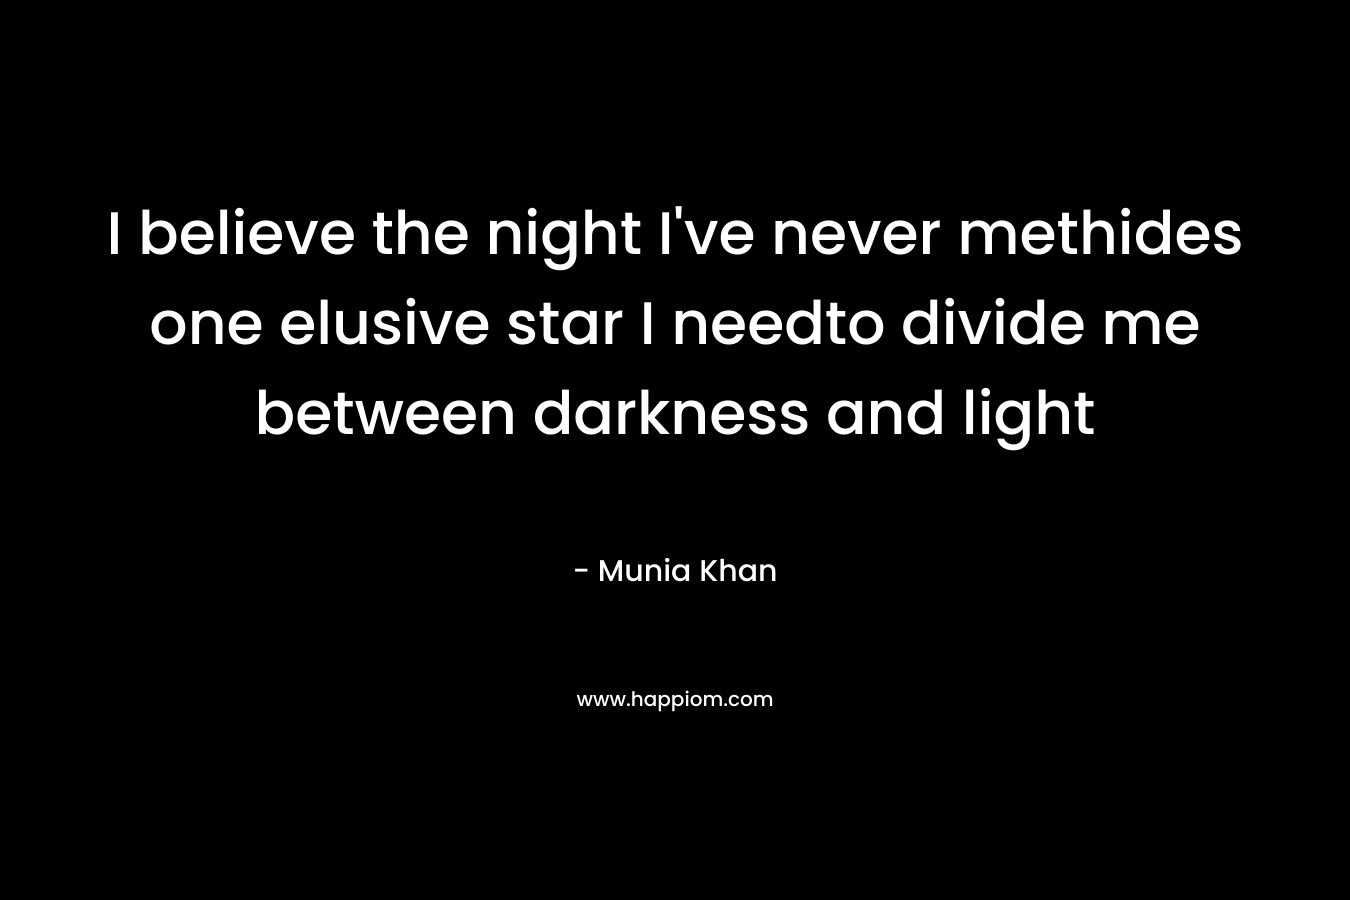 I believe the night I've never methides one elusive star I needto divide me between darkness and light